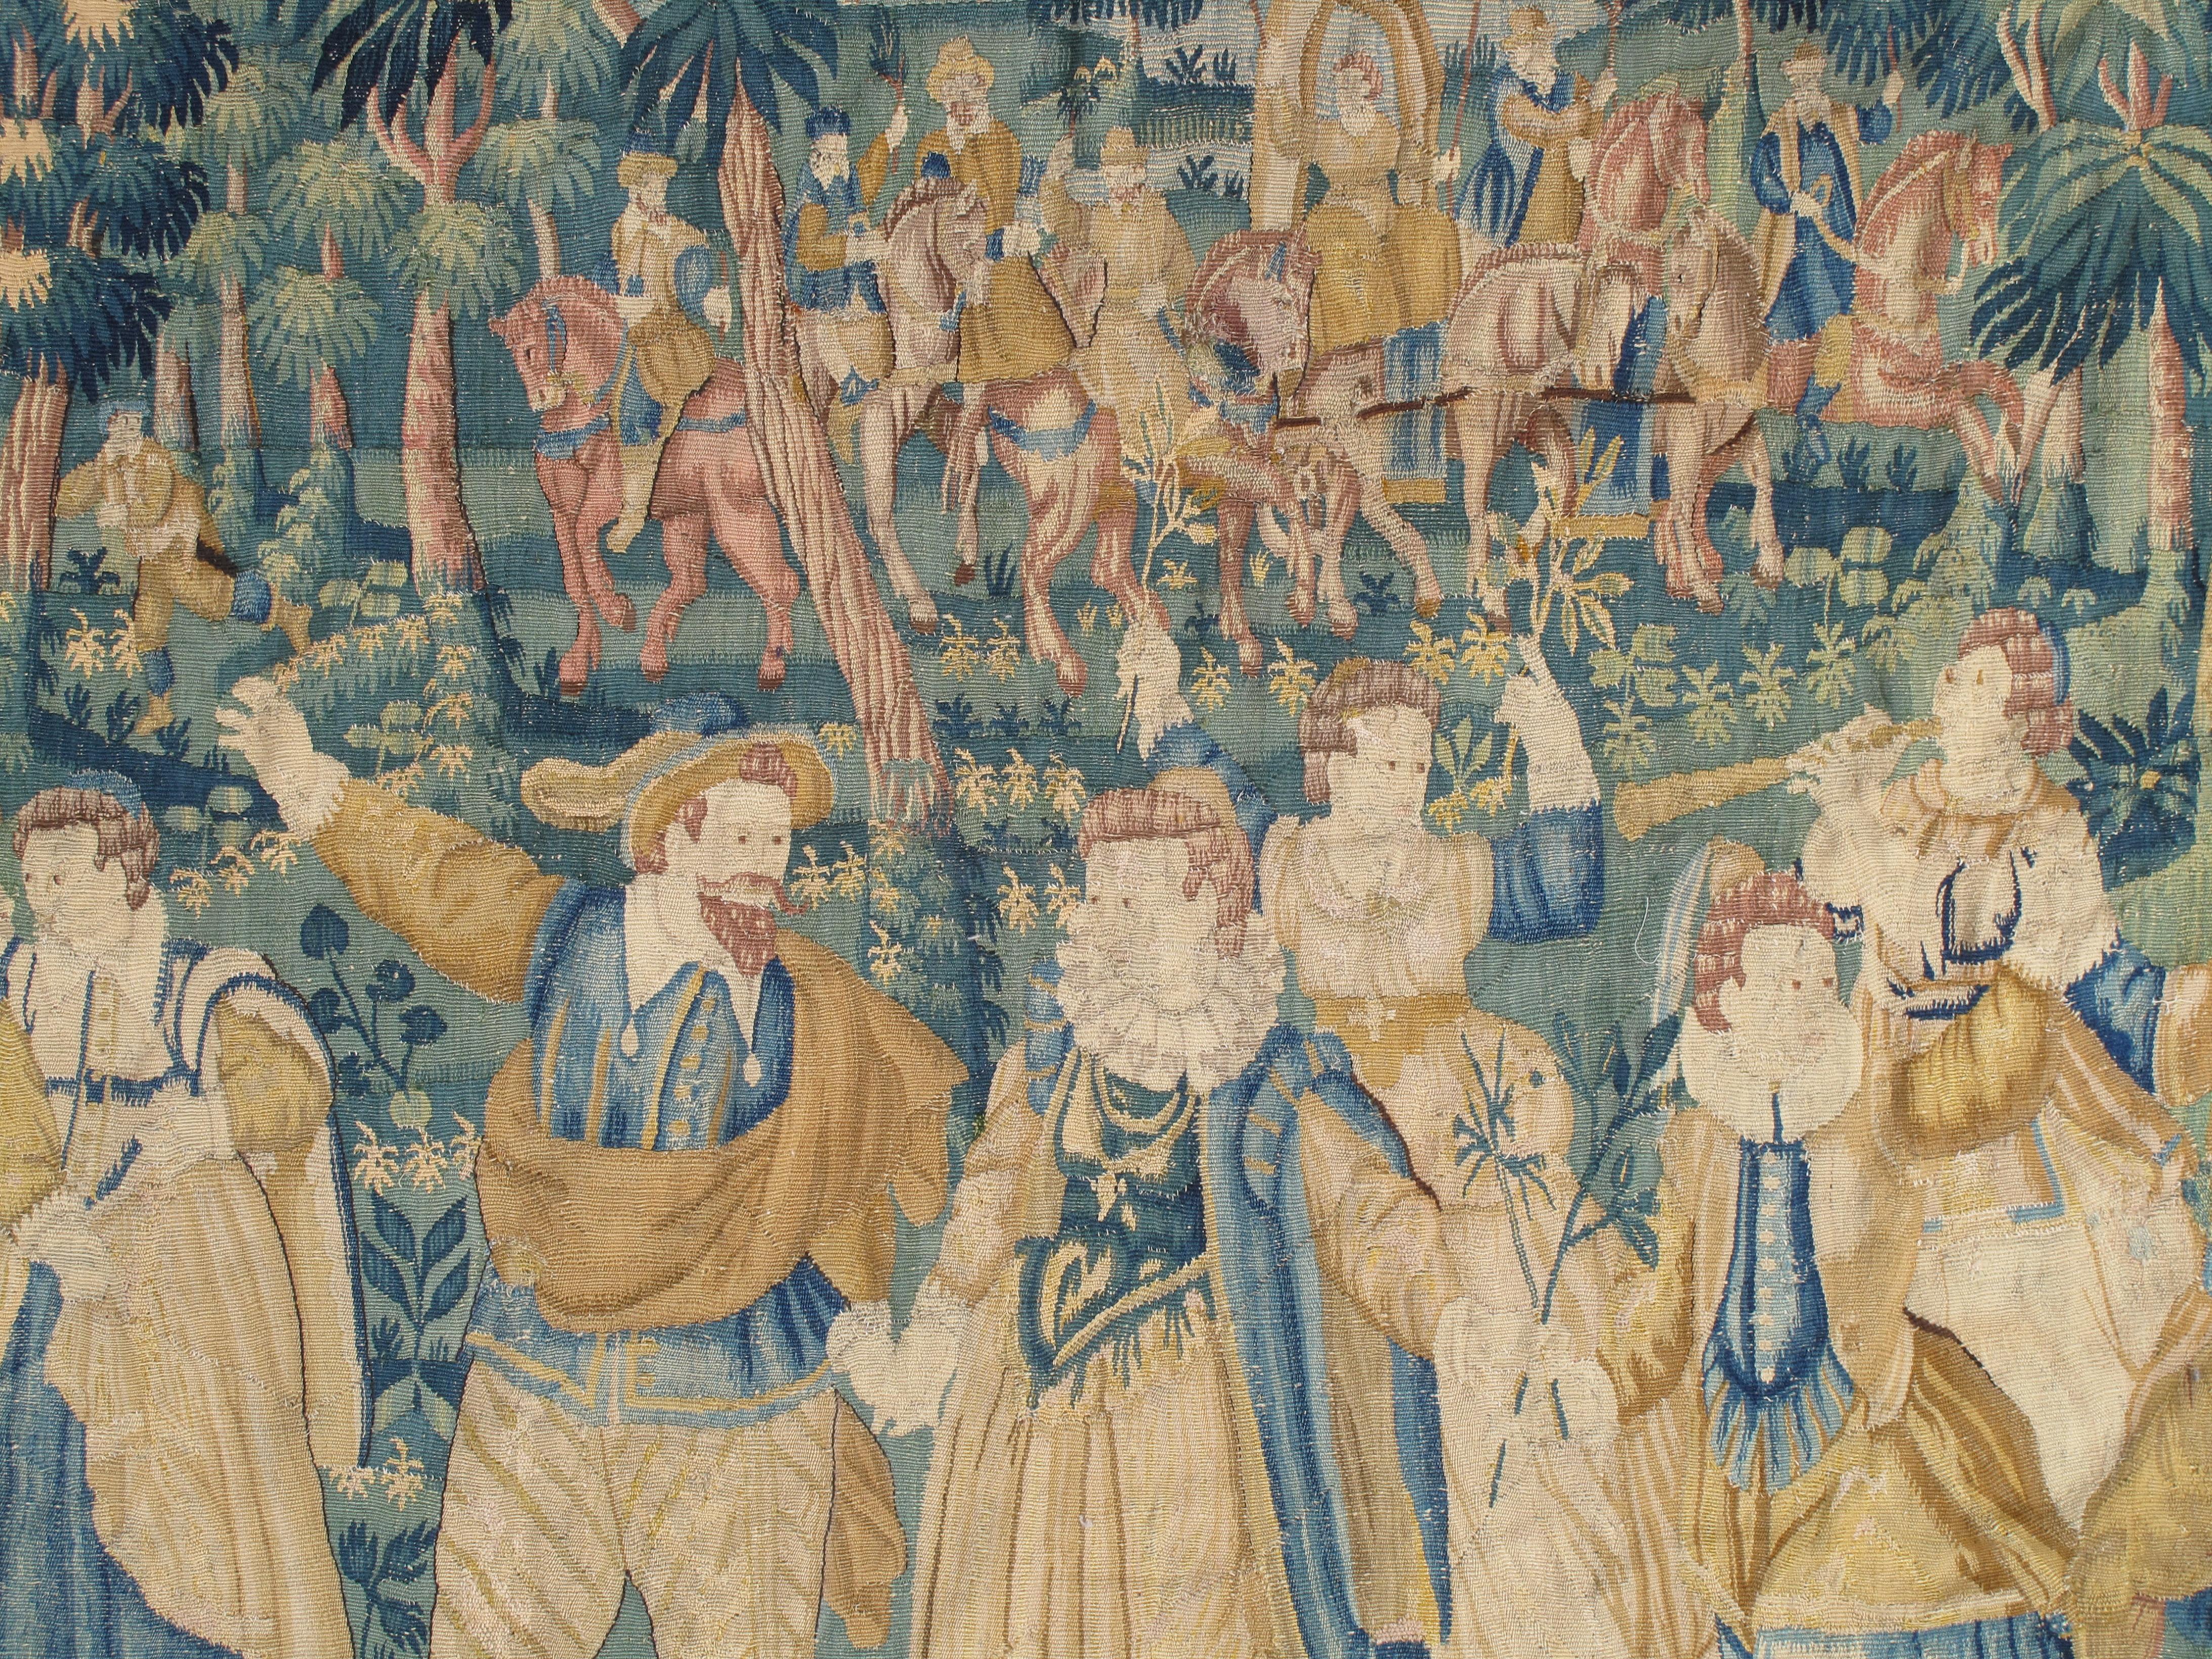 This magnificent tapestry was woven in Flanders during the middle of the European Renaissance, in the late 1500s. At this time, Flanders was creating some of the best textiles in the world, and many of the rich wooded scenes with animals and hunting